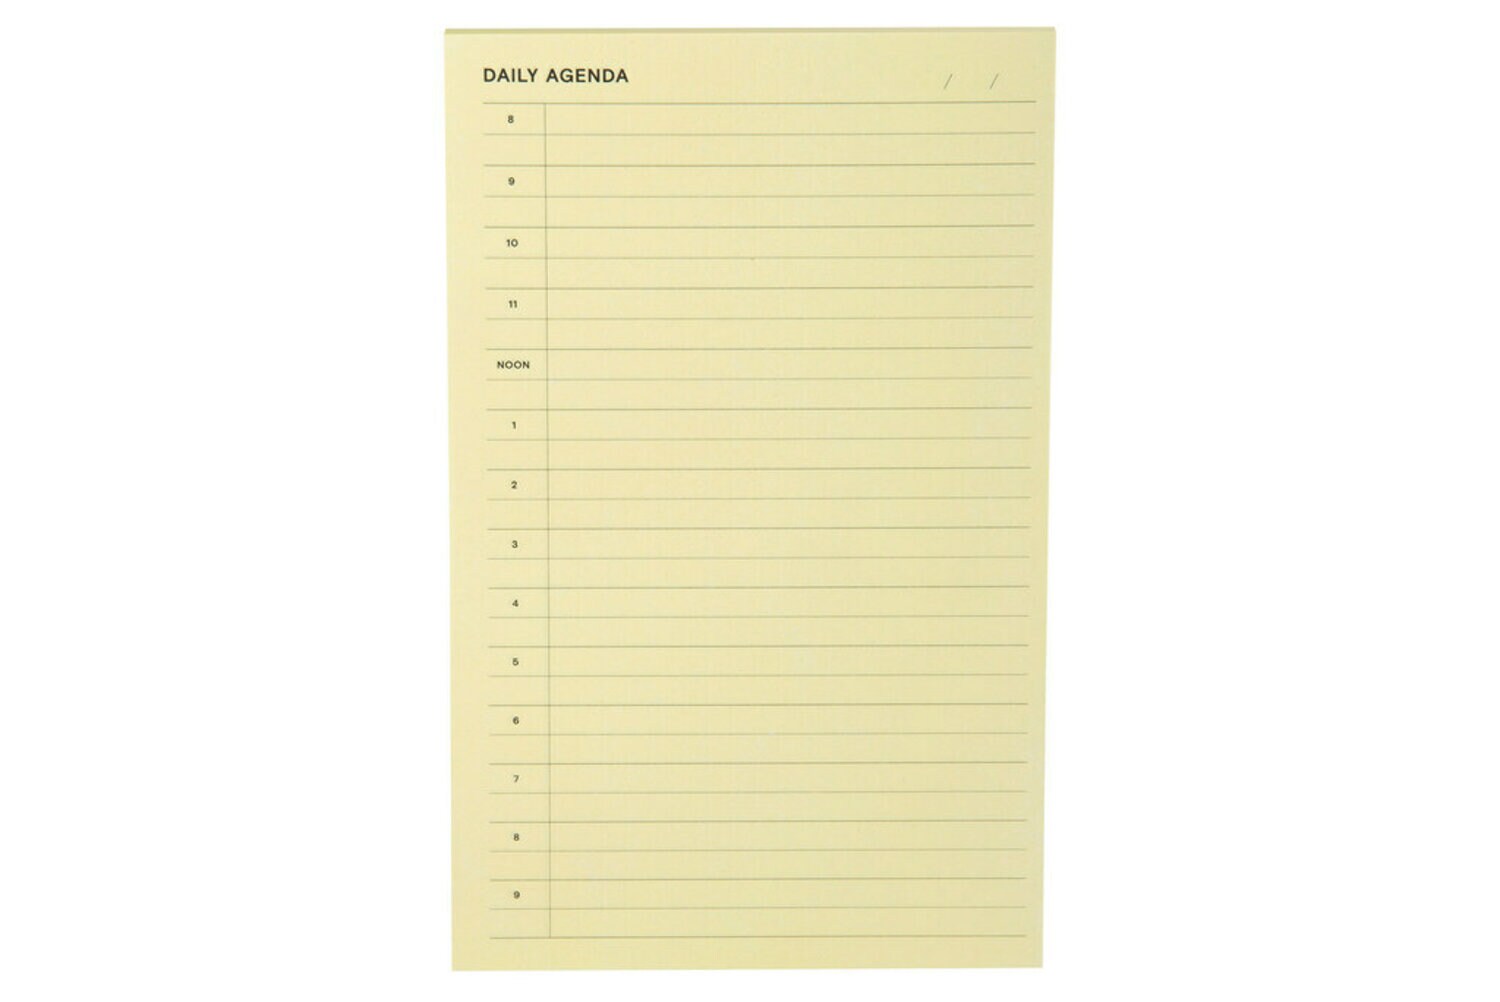 7100233955 - Post-it Printed Notes NTD-58-YLW, 4.9 in x 7.7 in (124 mm x 195 mm)